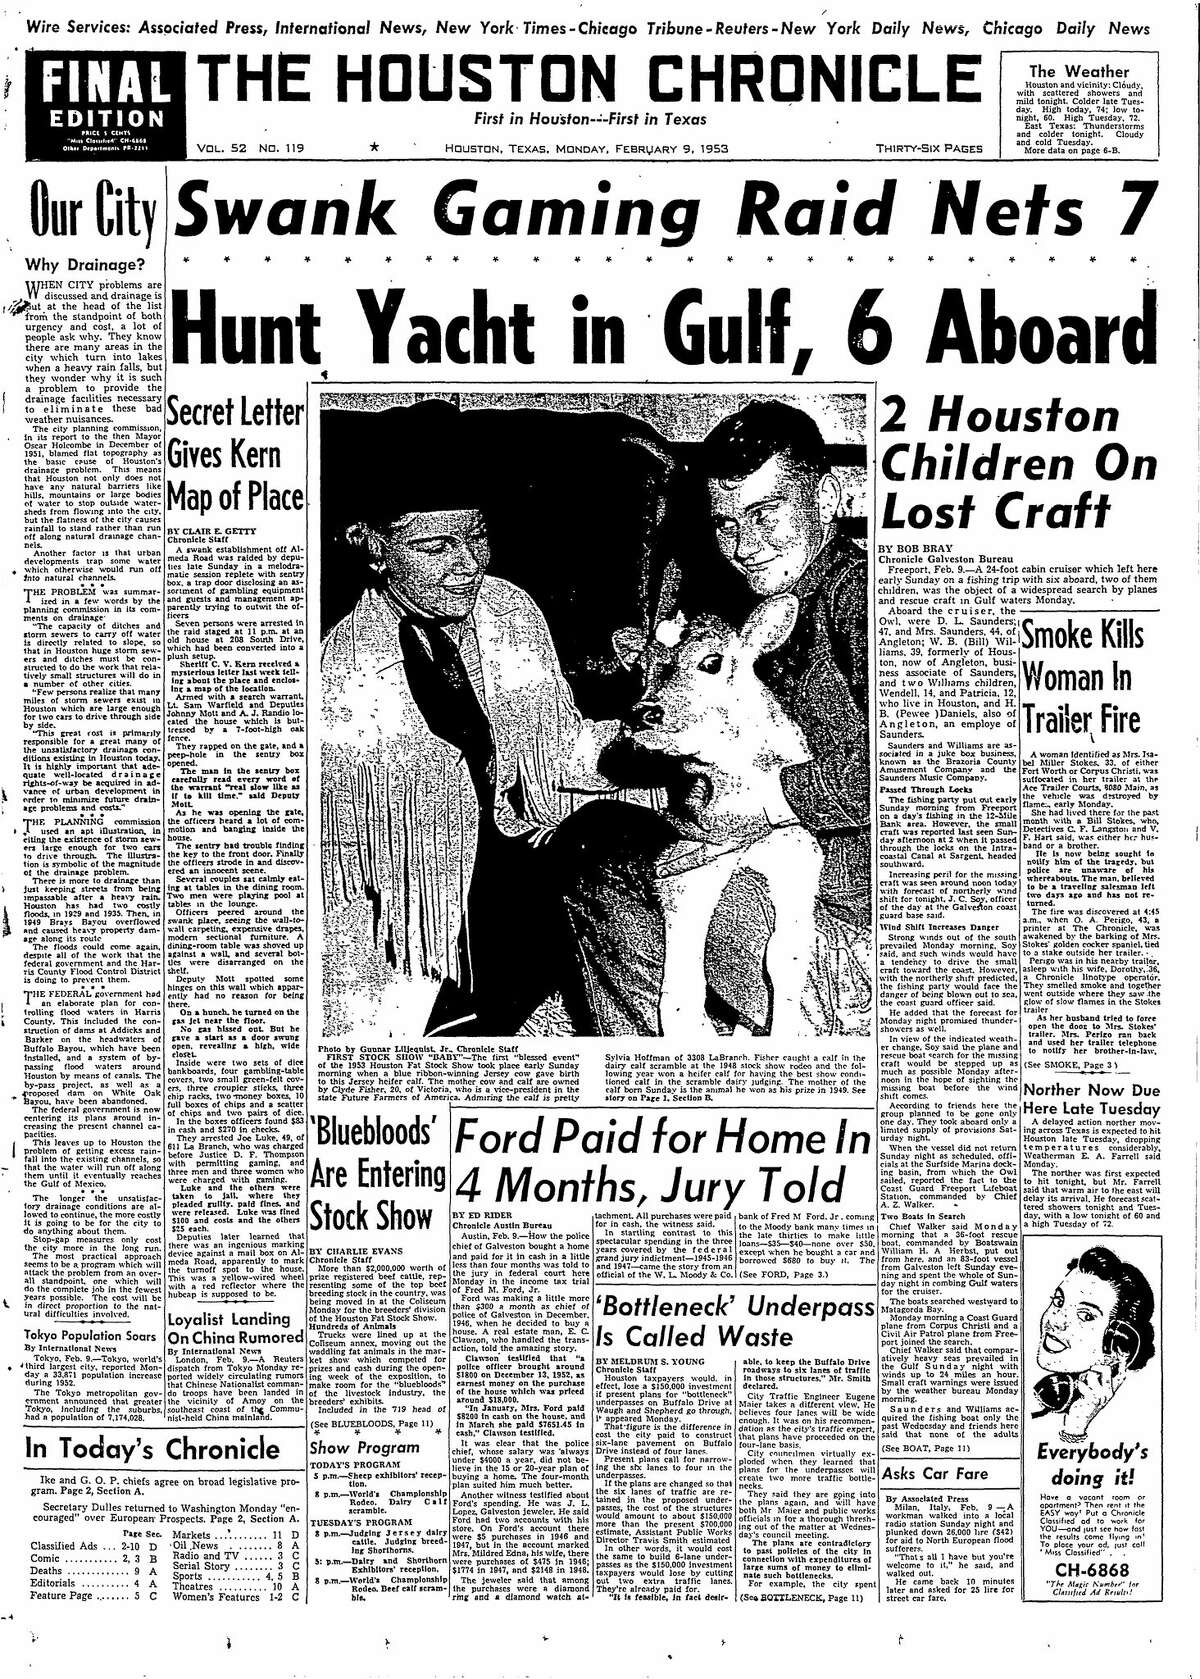 Houston Chronicle front page from Feb. 9, 1953.